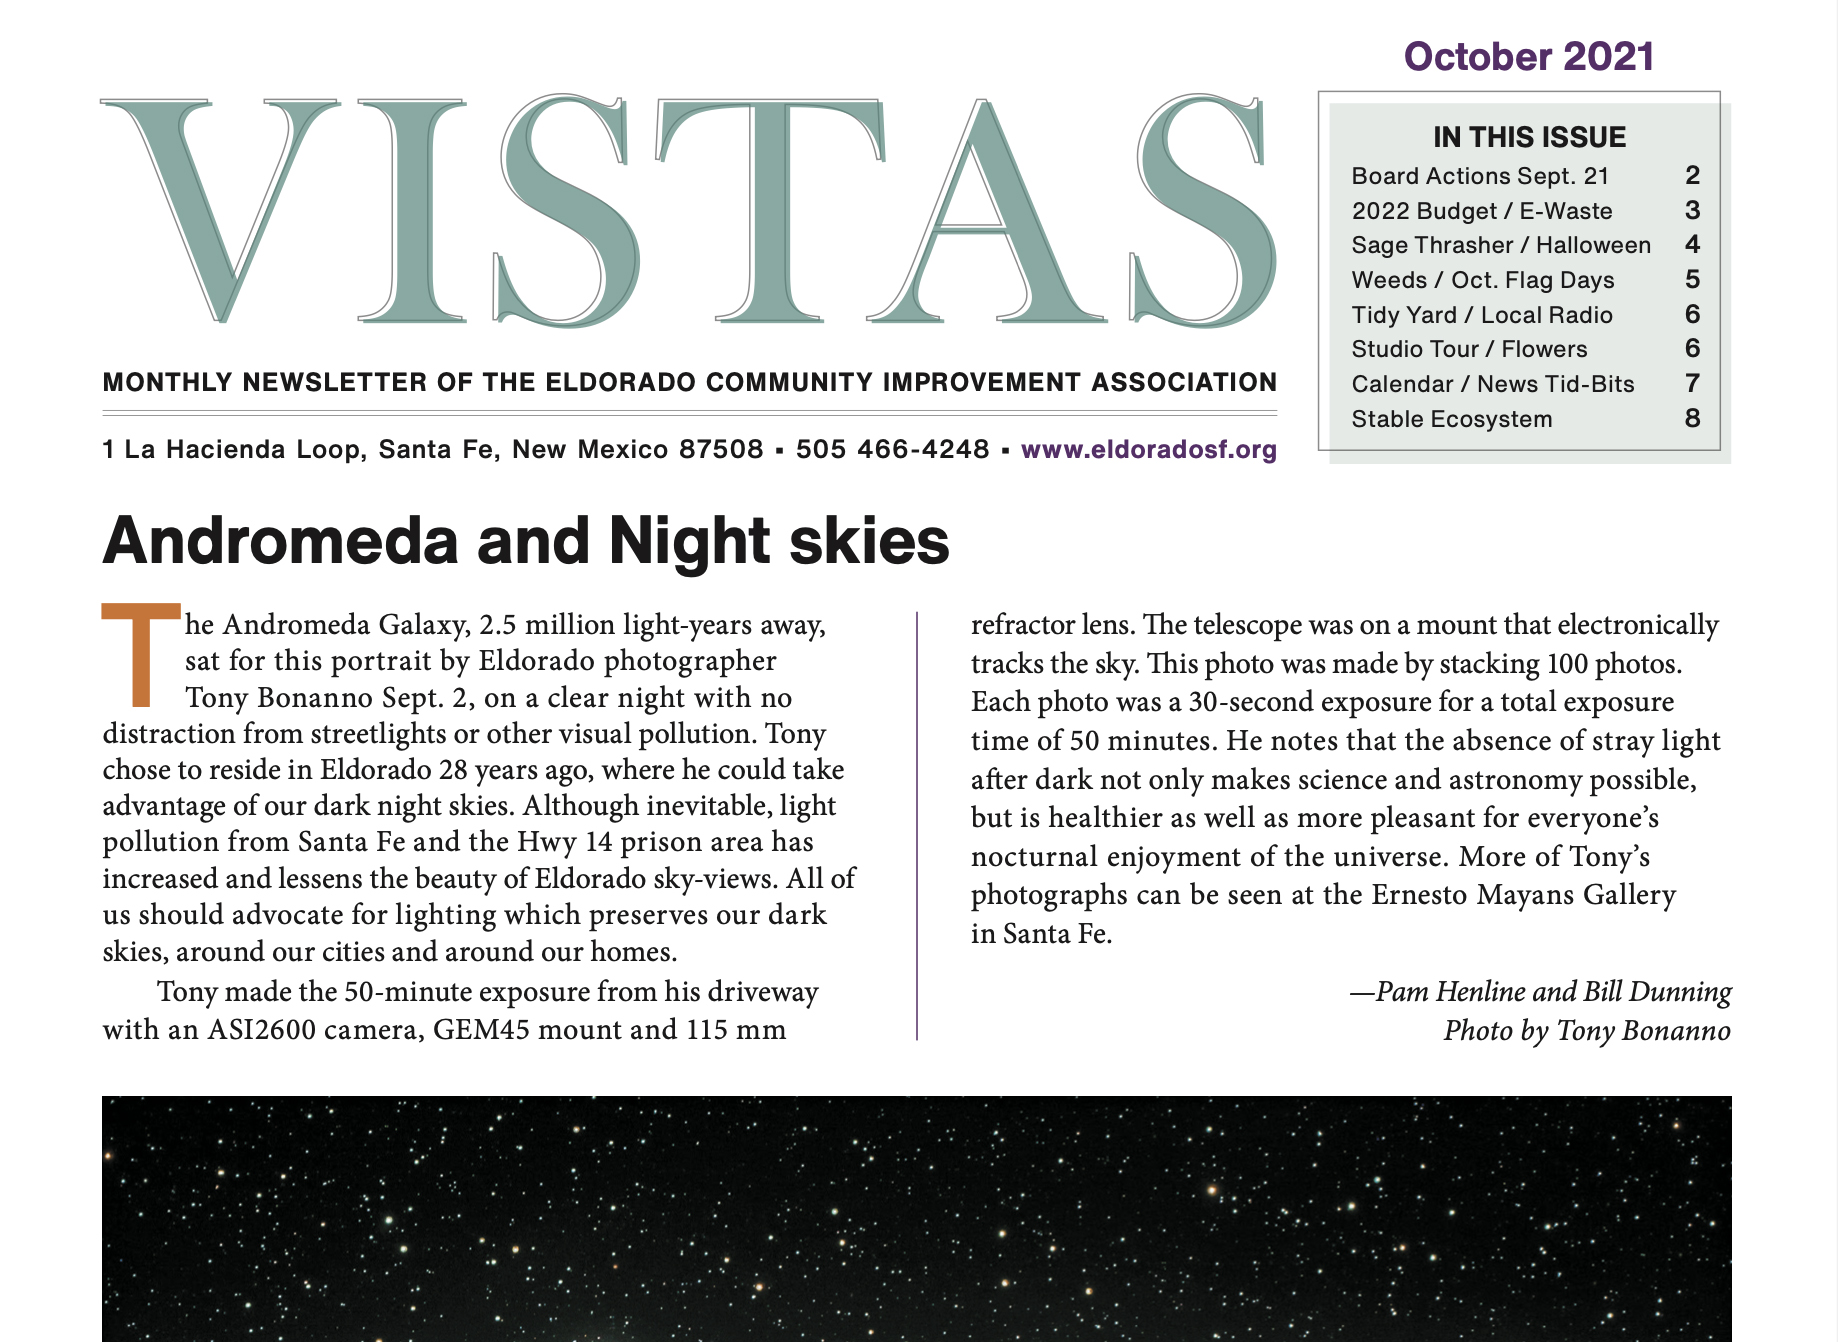 October Vistas Community Newsletter Now Available